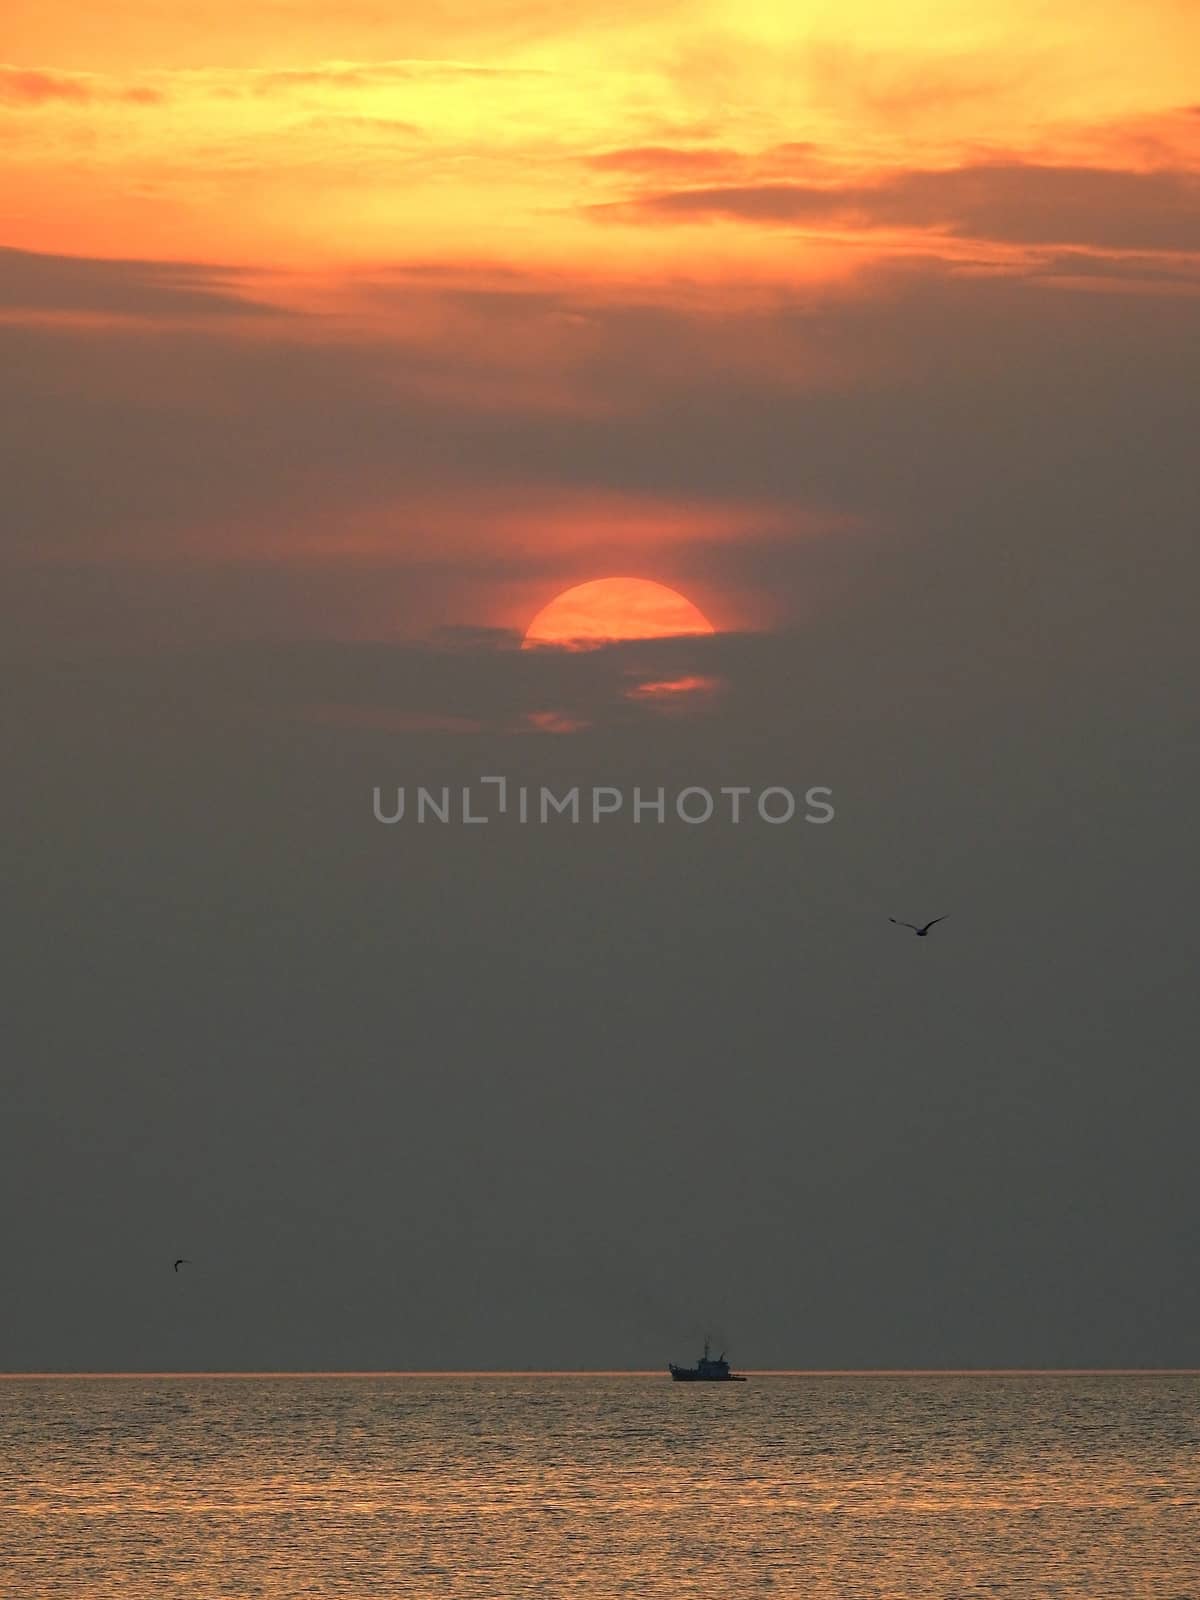 Sunset and  lonely boat at thailand sea by pkproject